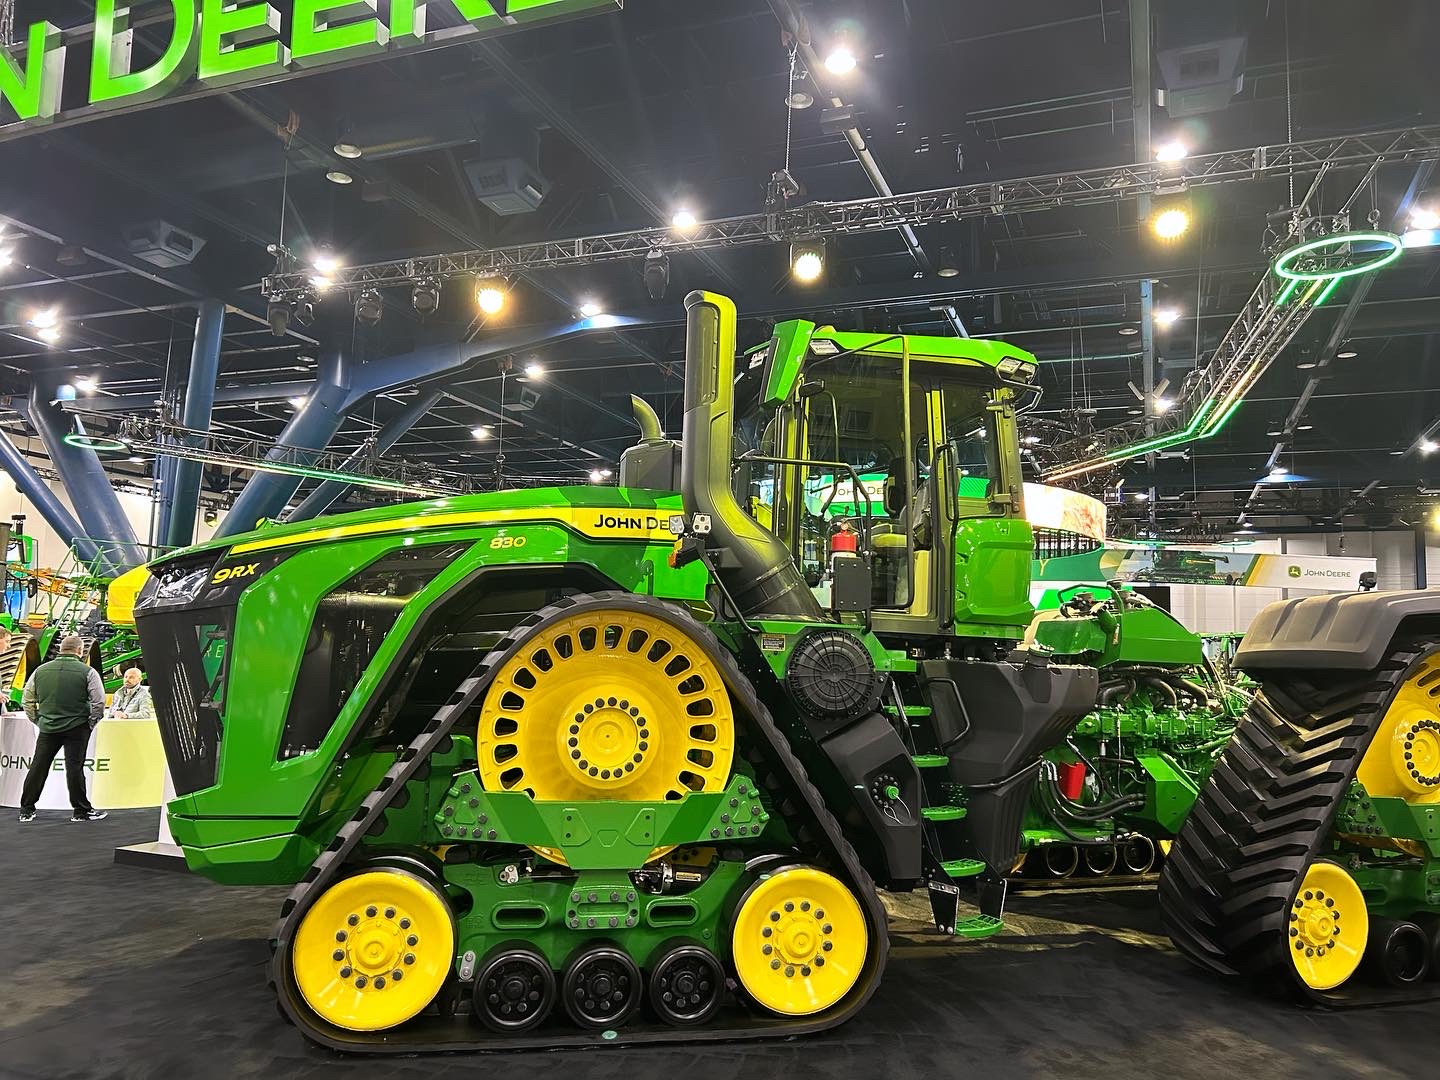 The Most Powerful John Deere Tractor Yet: The 9RX Series